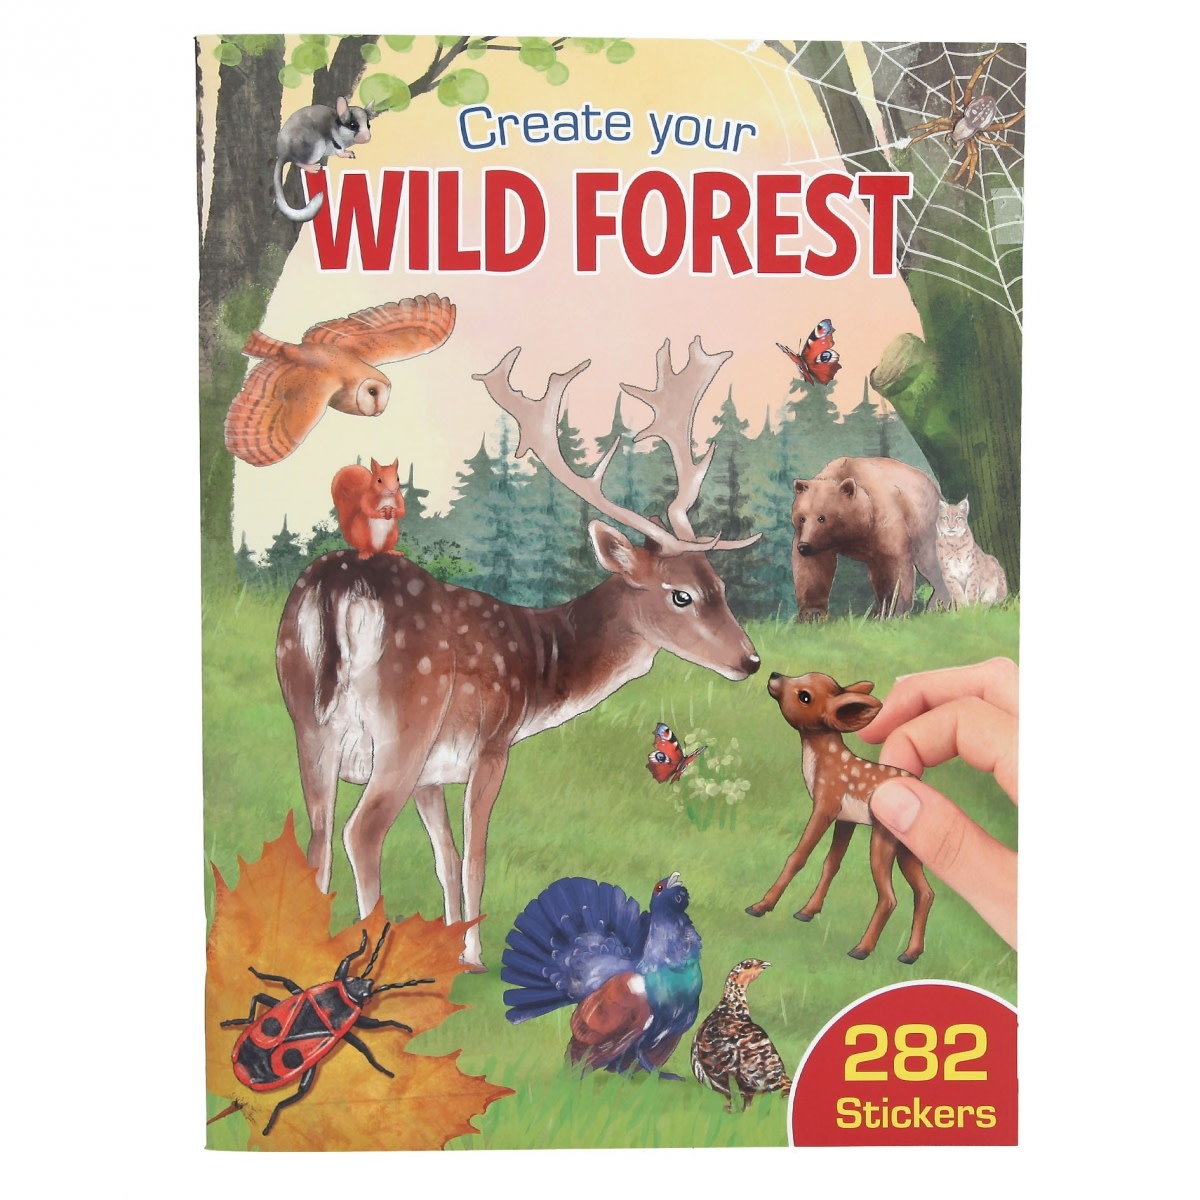 CREATE YOUR WILD FOREST